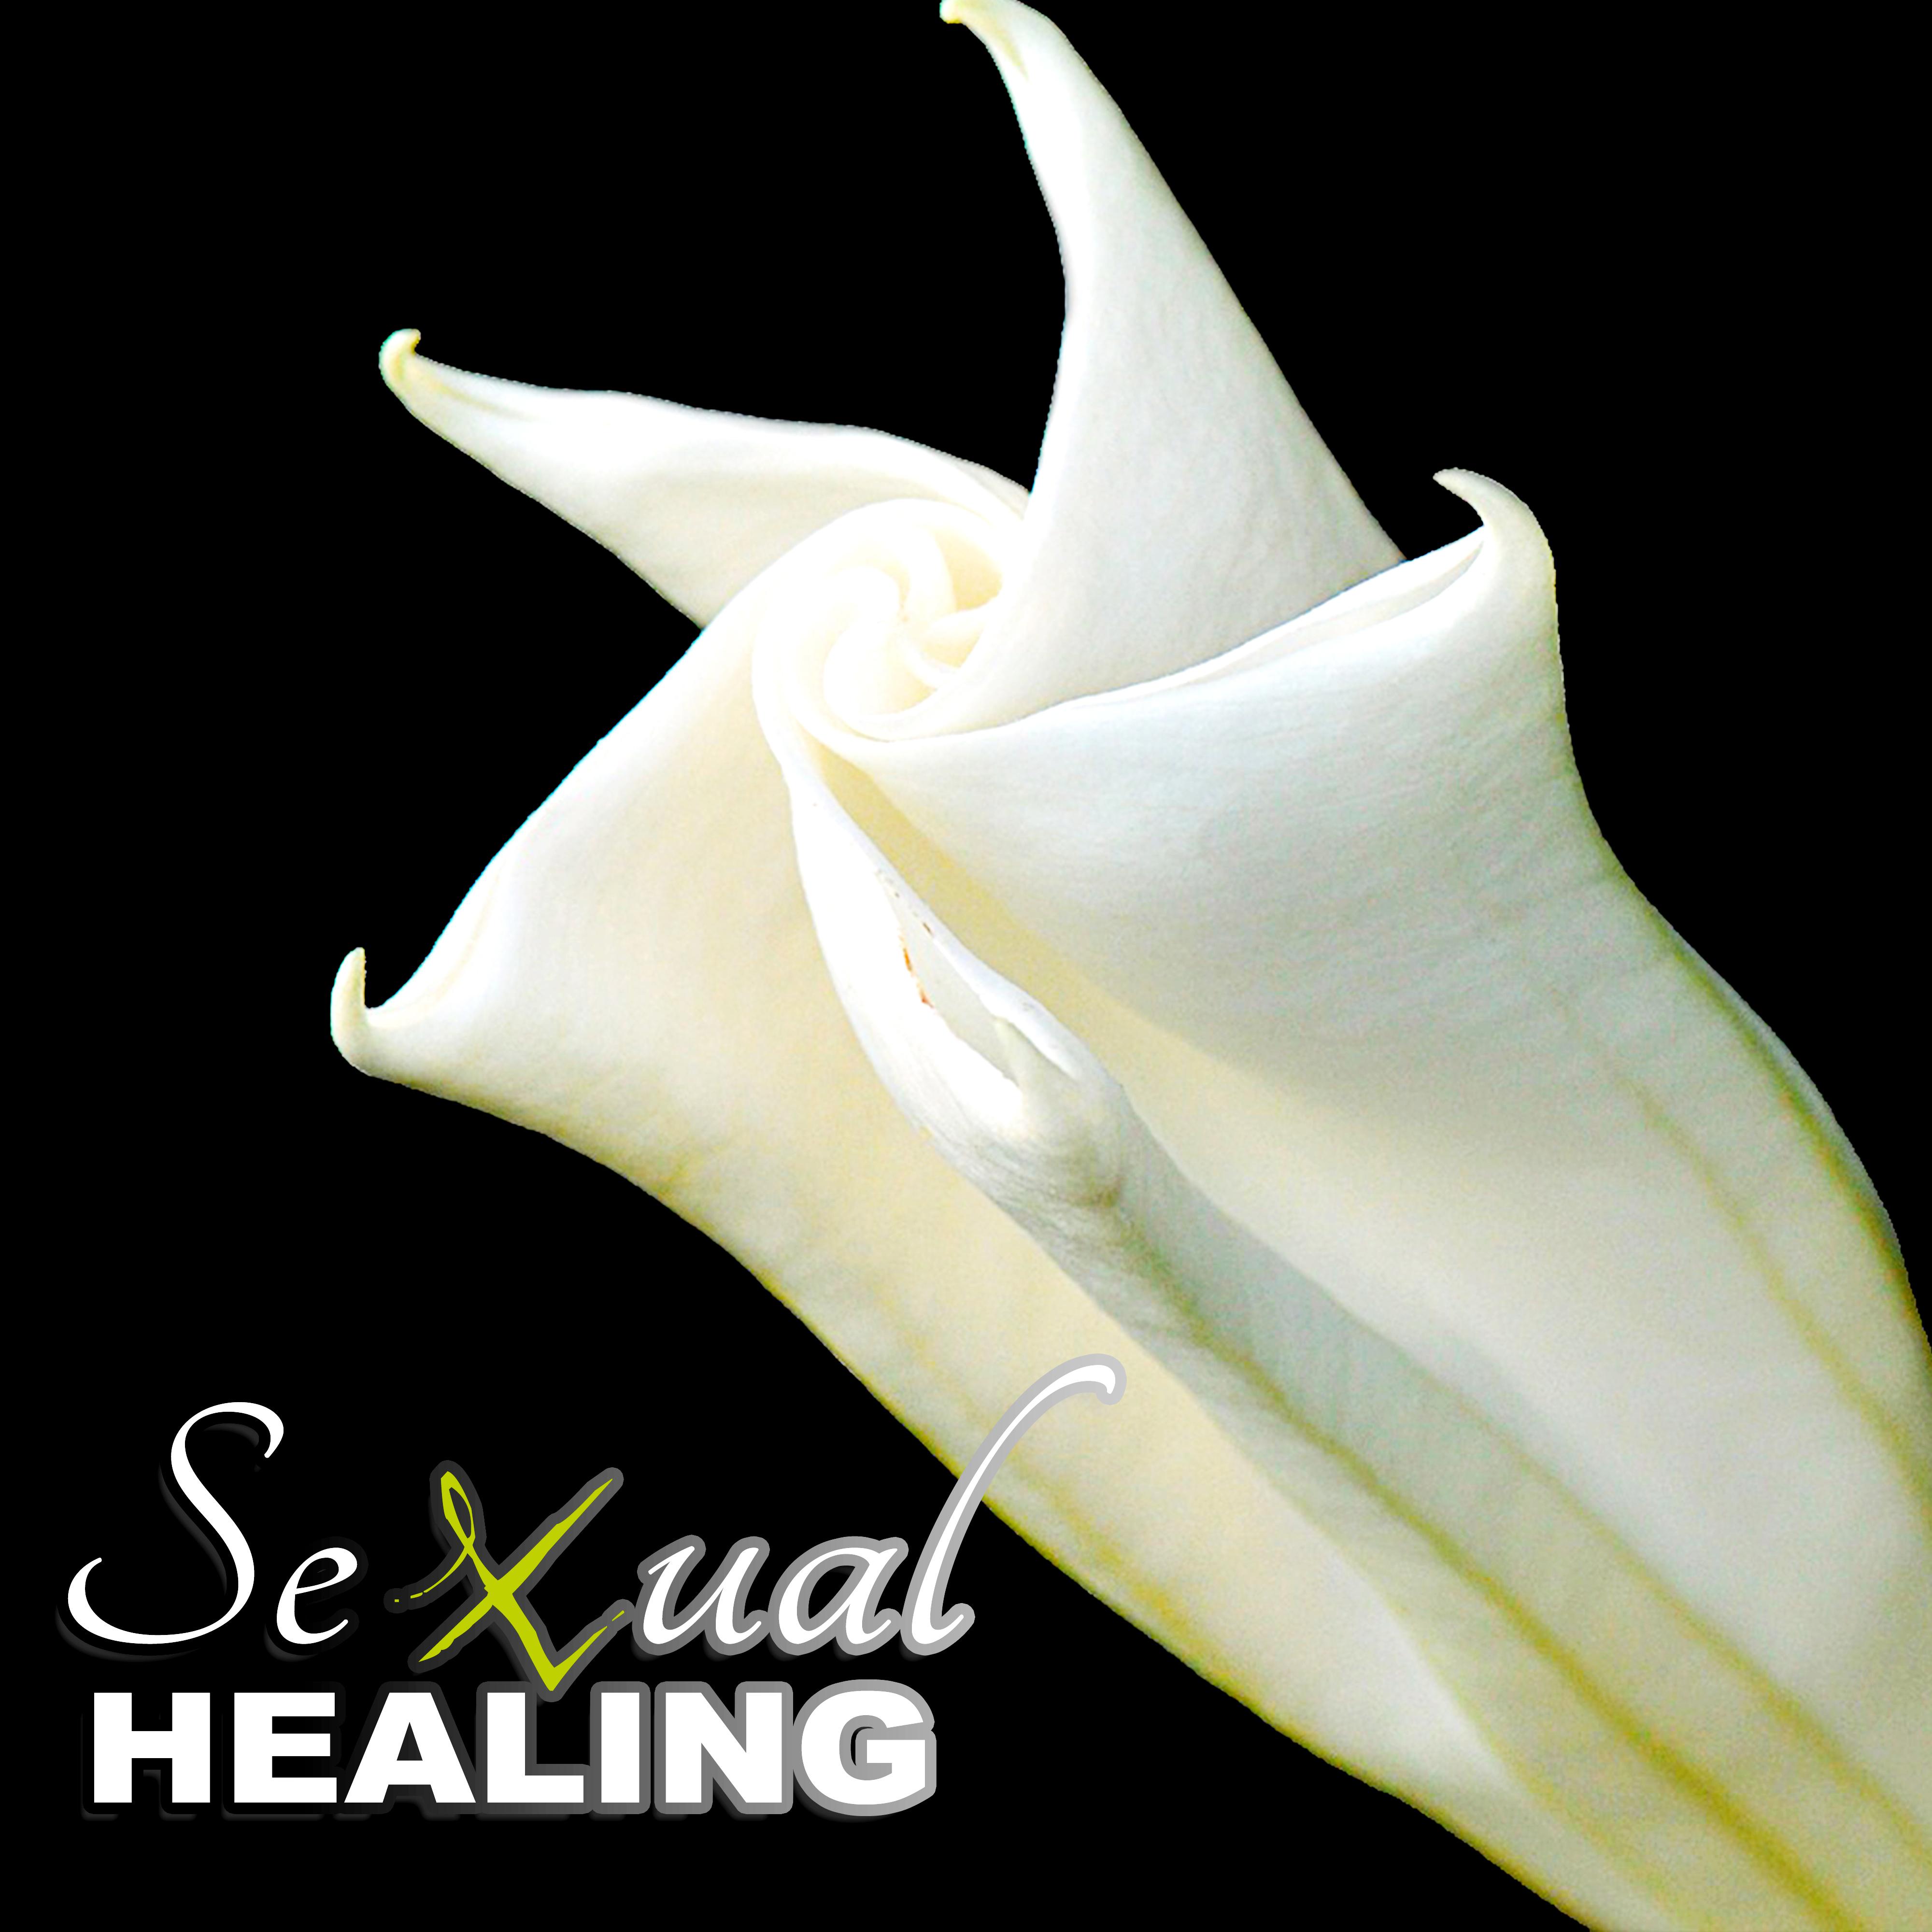 ****** Healing - Hot and Smooth ****** Healing Love Making, *** Music for Intimate Erotic Moments, Kuma Sutra, Instrumental Love Songs, Erotic Massage, Erotic Lounge